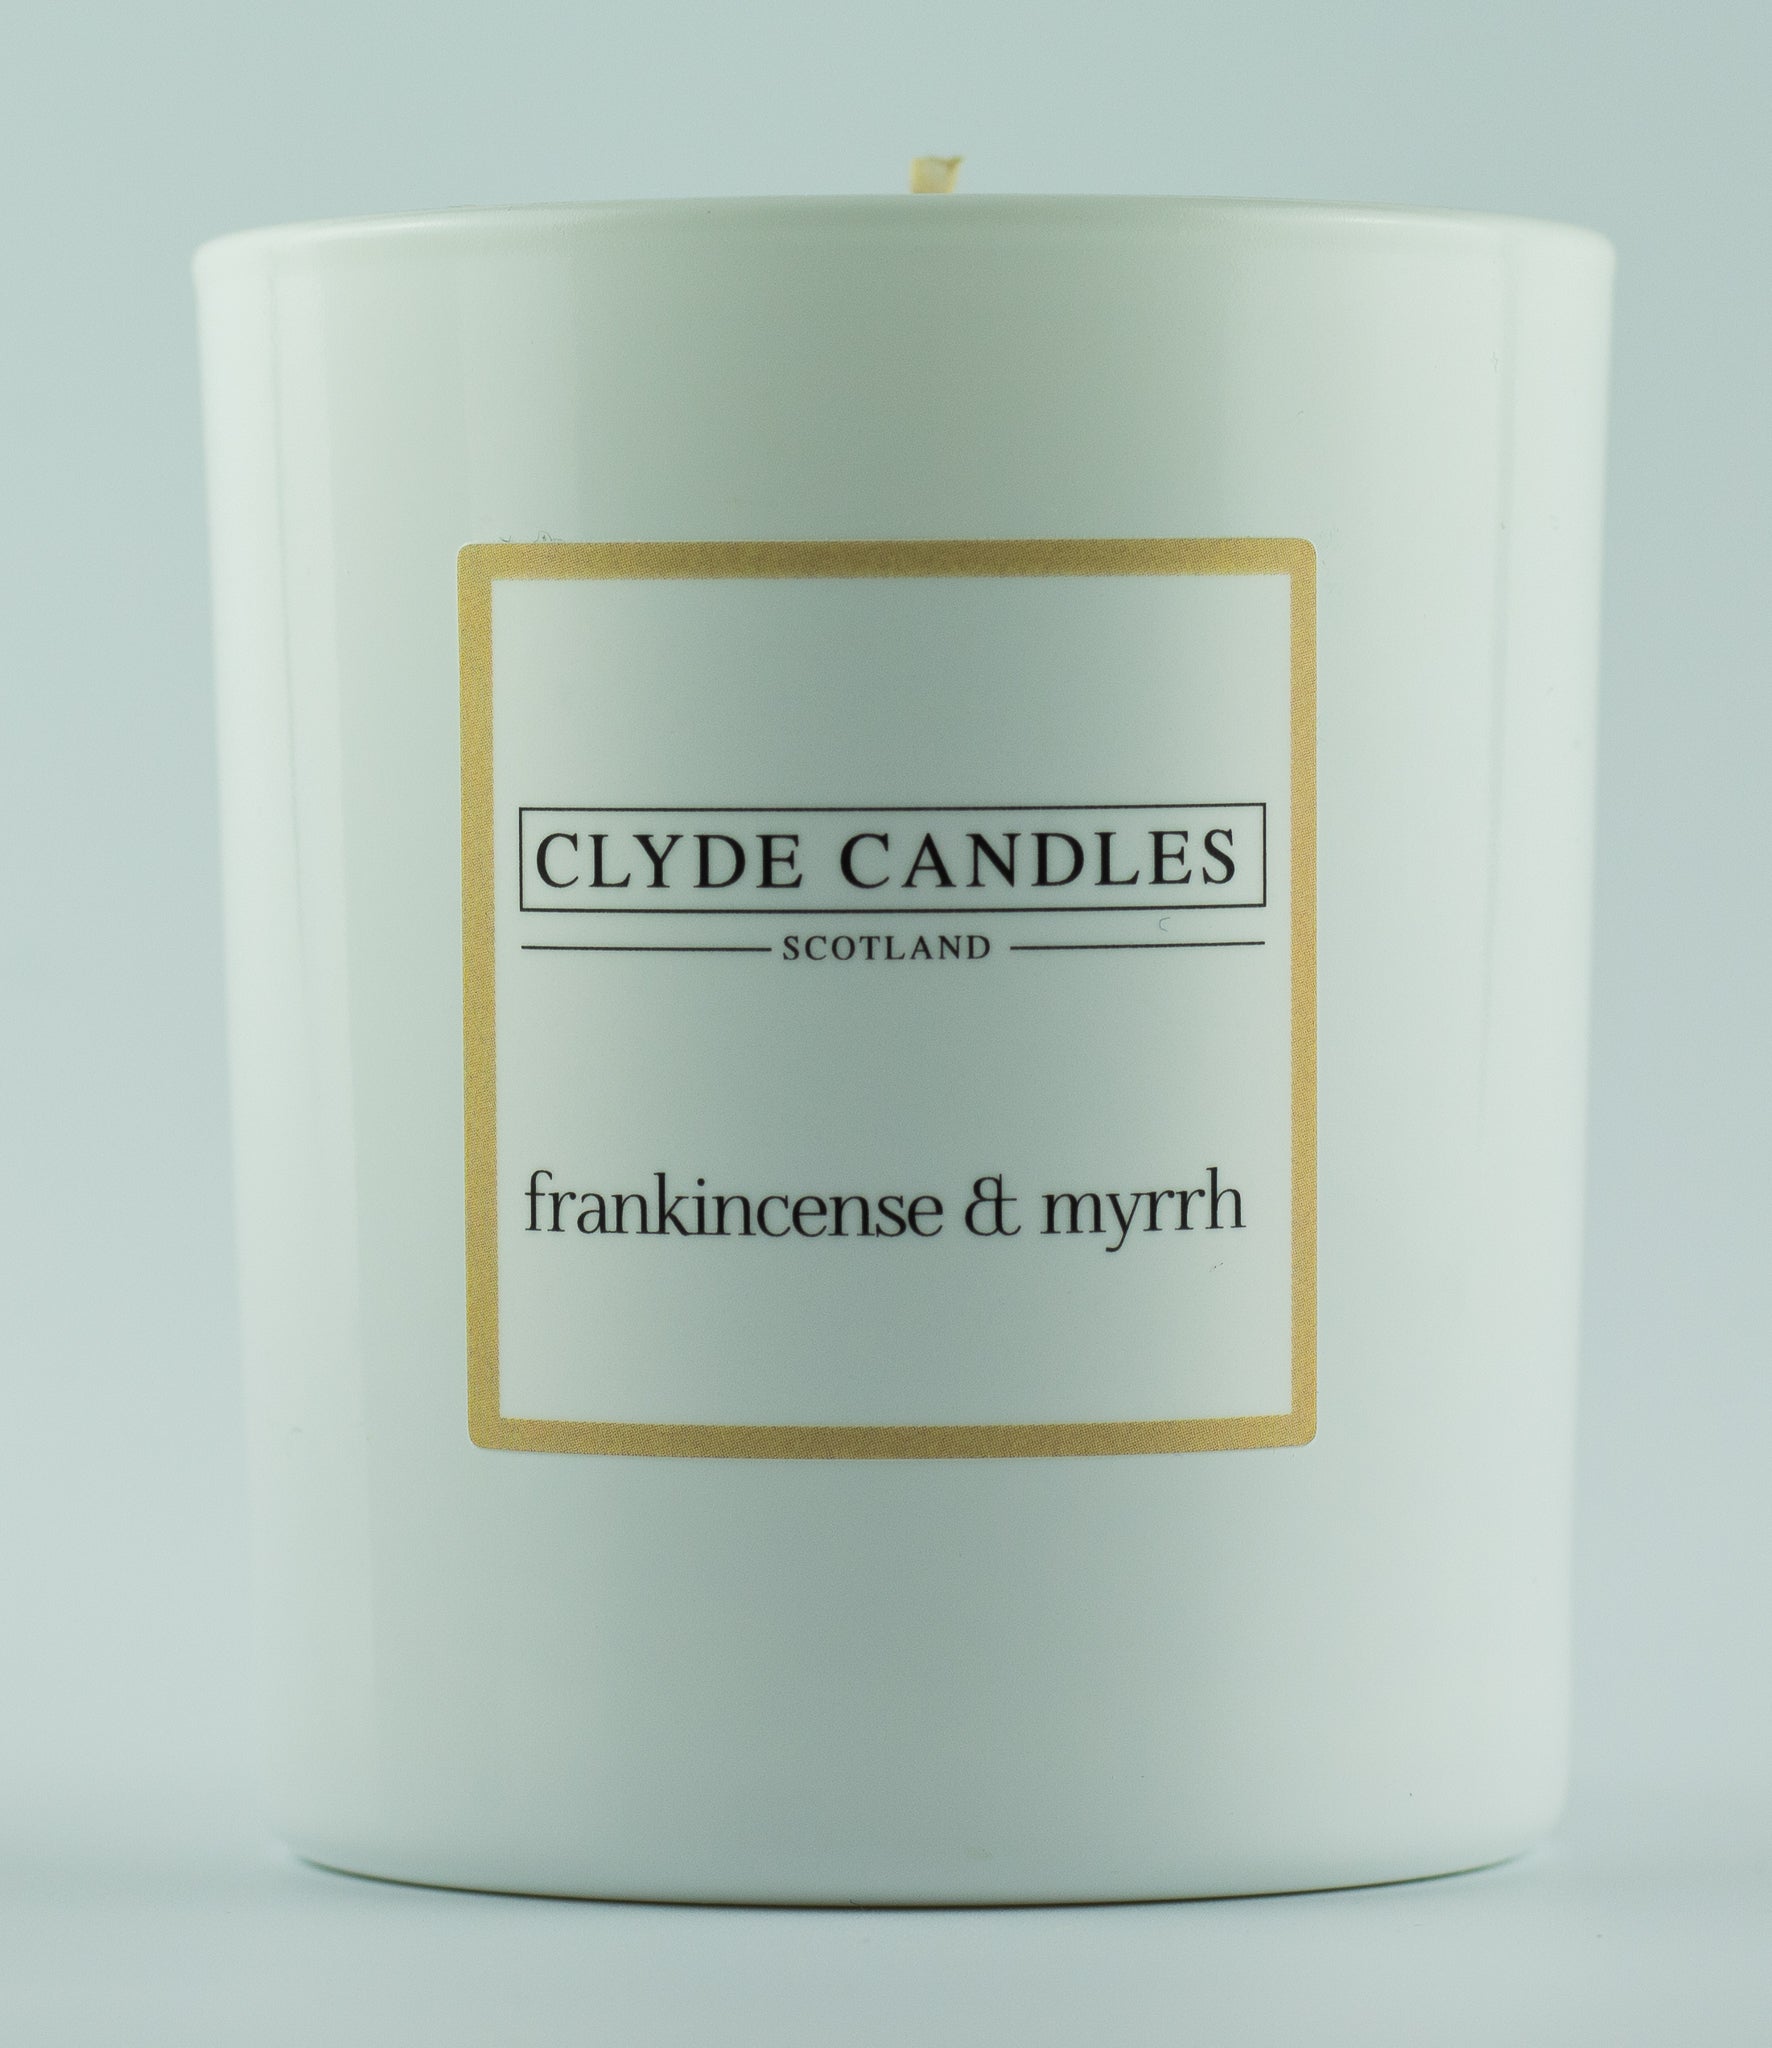 Frankincense & Myrrh Gift Box Candle - Large Glass Natural Soy wax, Scottish Candles, Clyde Candles